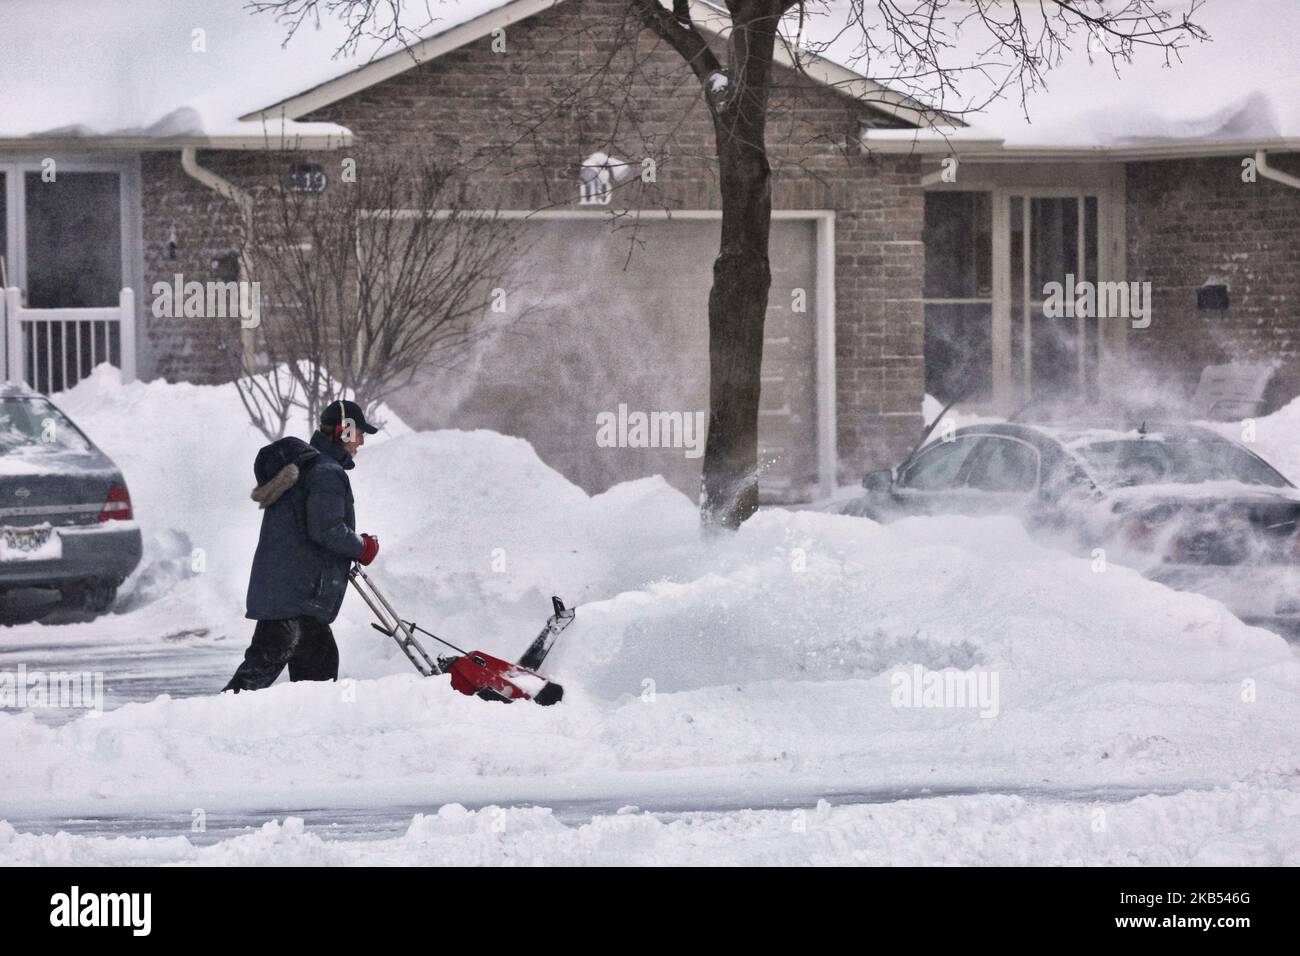 Man uses a snow-blower to clear snow from his driveway after a massive snowstorm hit Toronto, Ontario, Canada, on January 28, 2019. The storm dropped between 15-25 centimeters of snow across the Greater Toronto Area and broke the record for snowfall amount set in January 2009, with more than 22cm falling before midnight yesterday. (Photo by Creative Touch Imaging Ltd./NurPhoto) Stock Photo